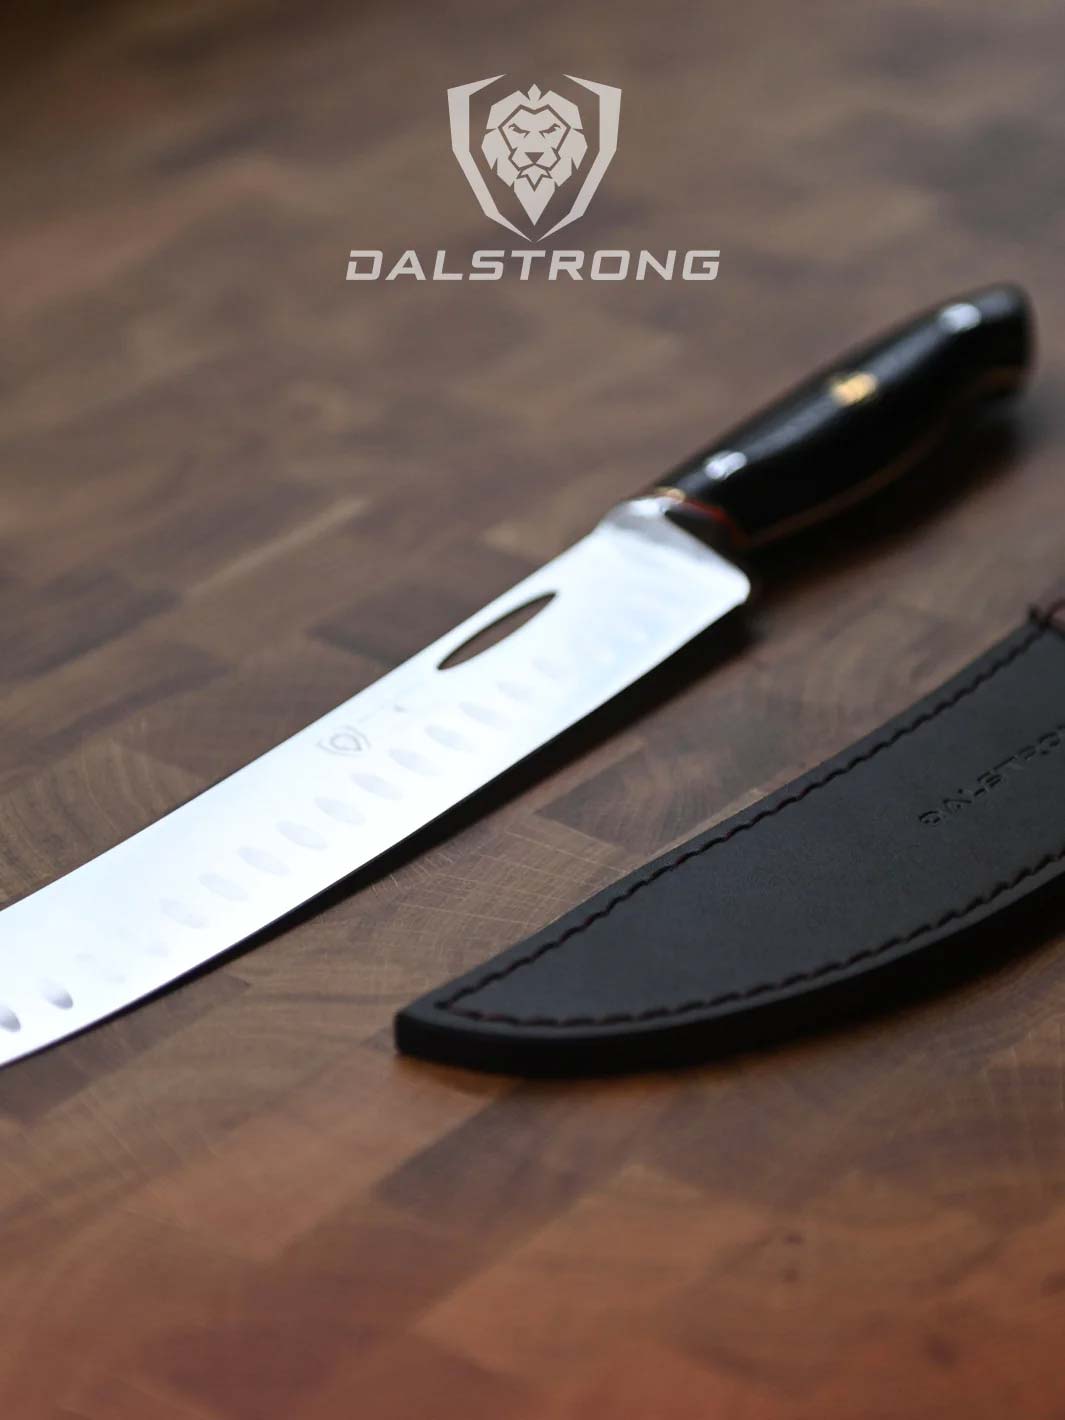 Dalstrong Butcher Knife - 10 inch - Centurion Series - Premium Swedish 14C28N High Carbon Stainless Steel - G10 Handle Meat Kitchen Knife - Razor